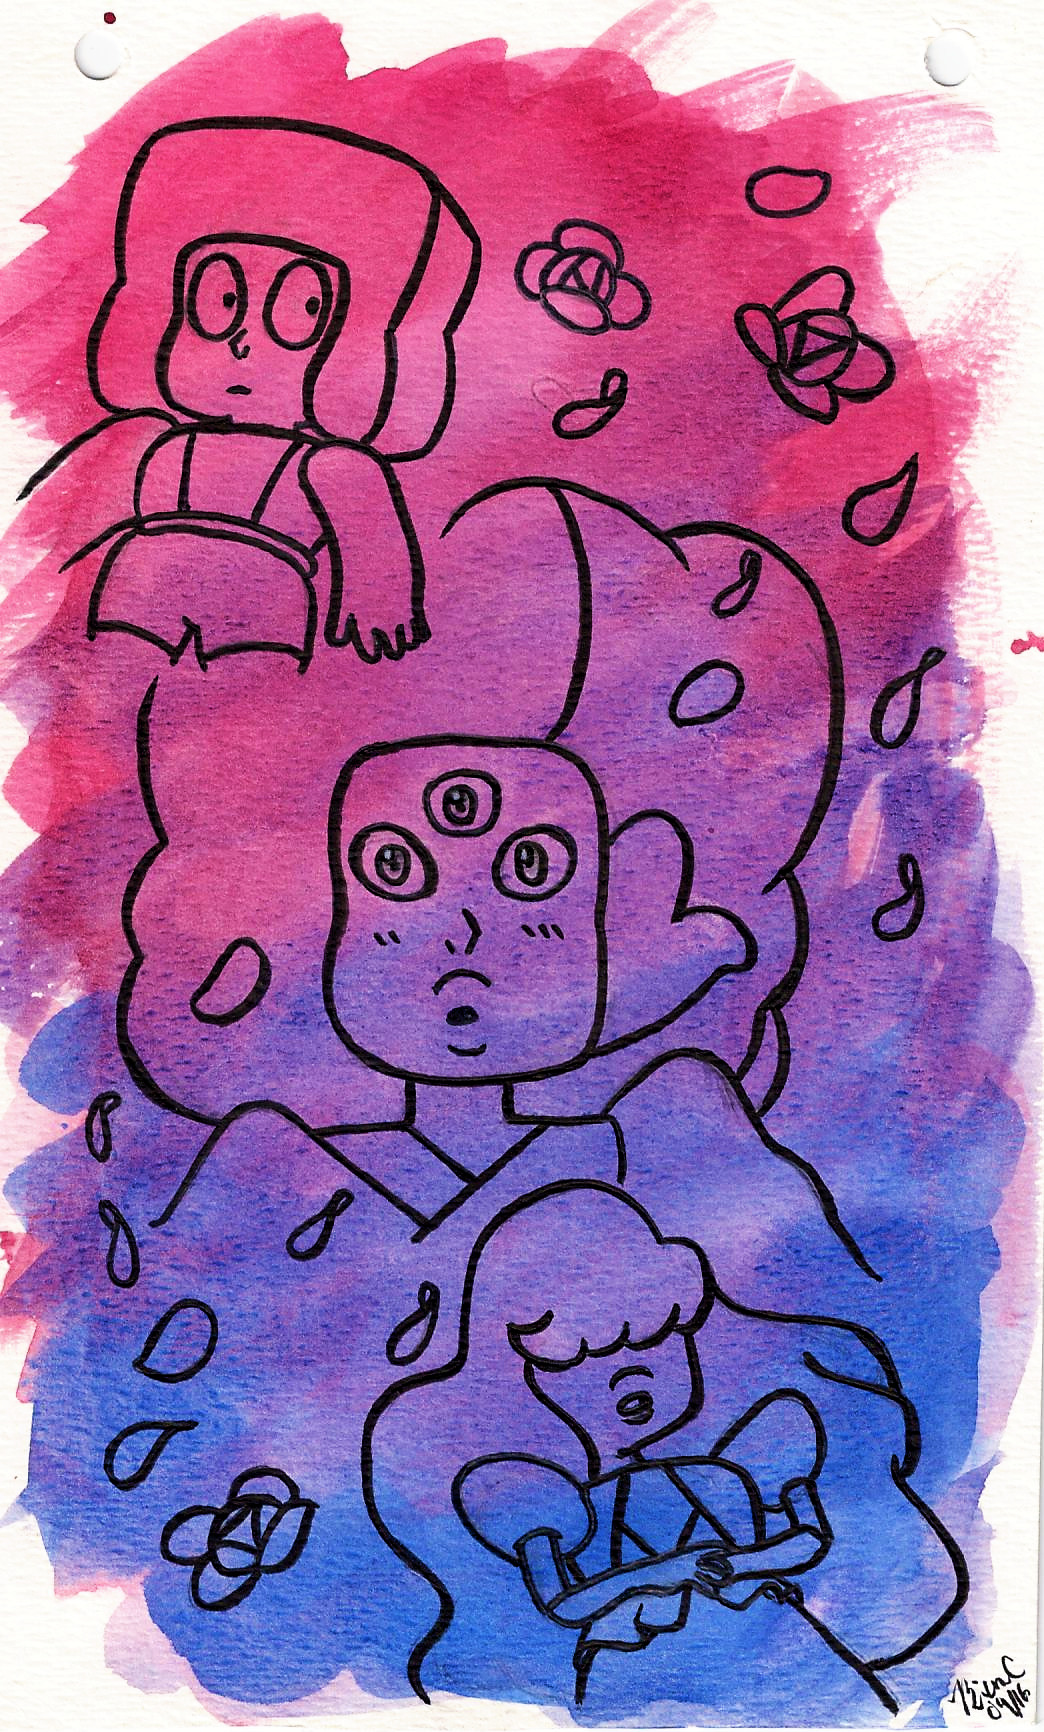 An old painting I did right after I watched “The Answer” from Steven Universe! (Watercolor and Brush pen on cold pressed watercolor paper)